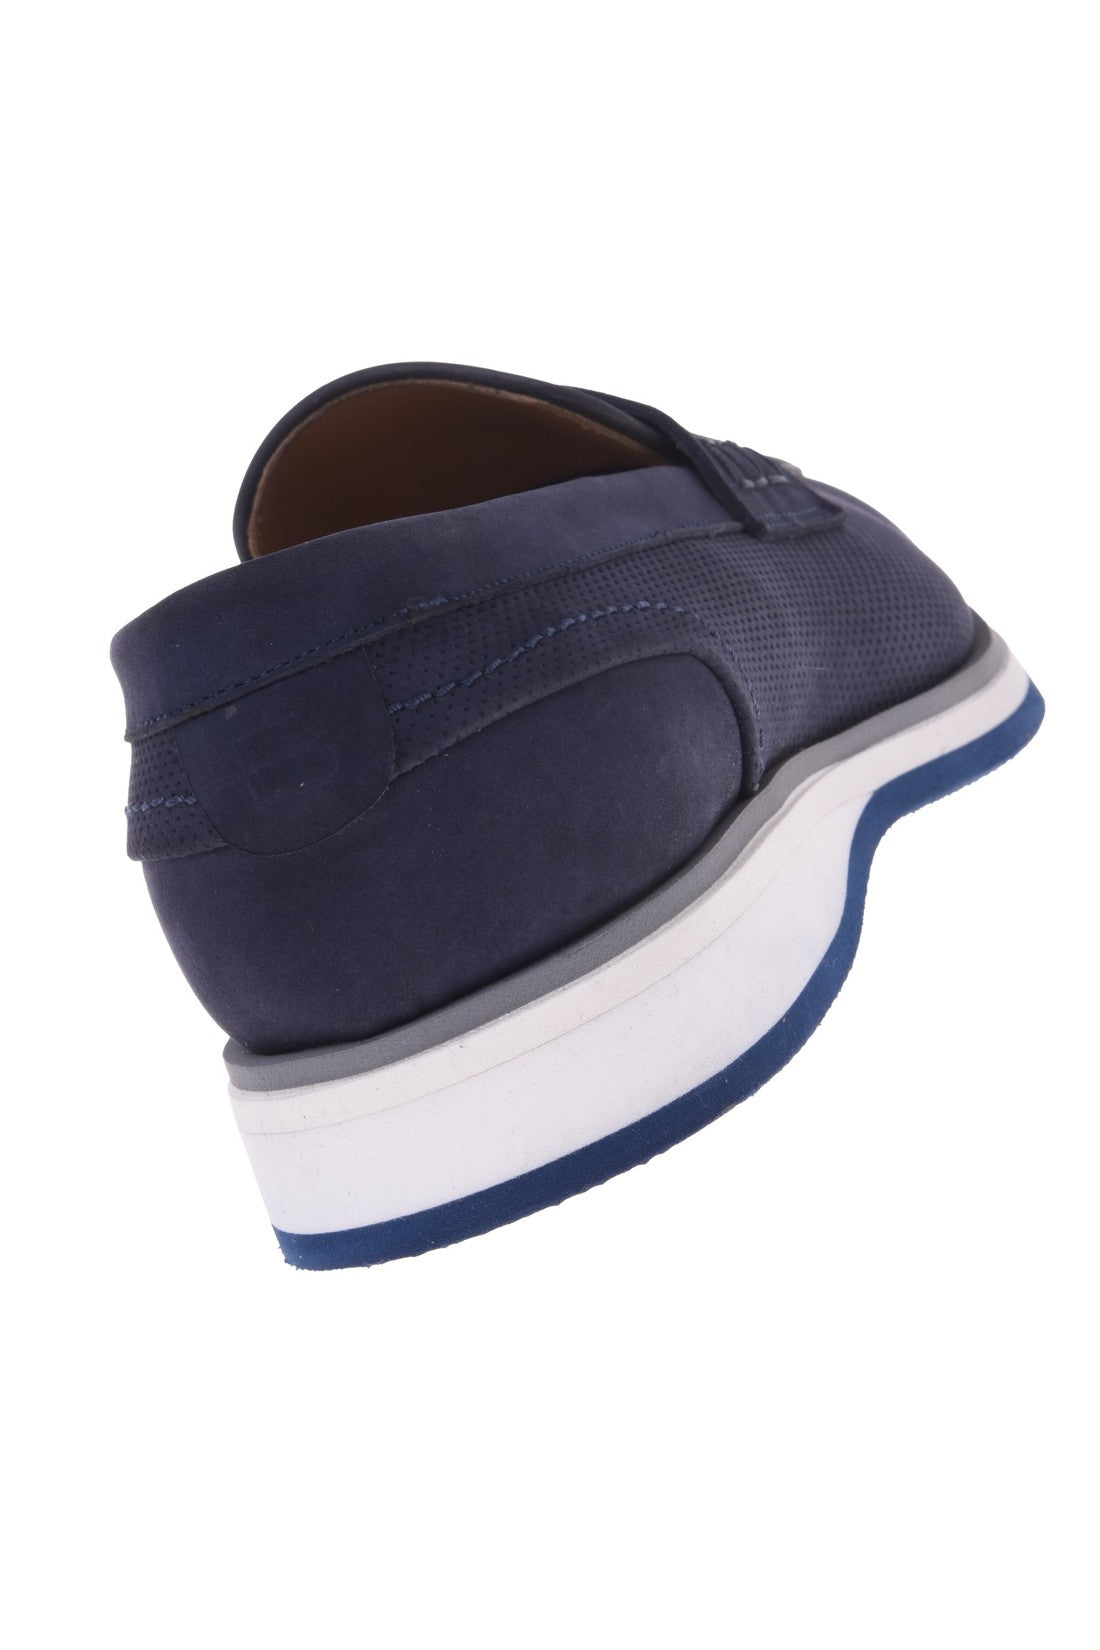 Loafer in denim perforated nubuck